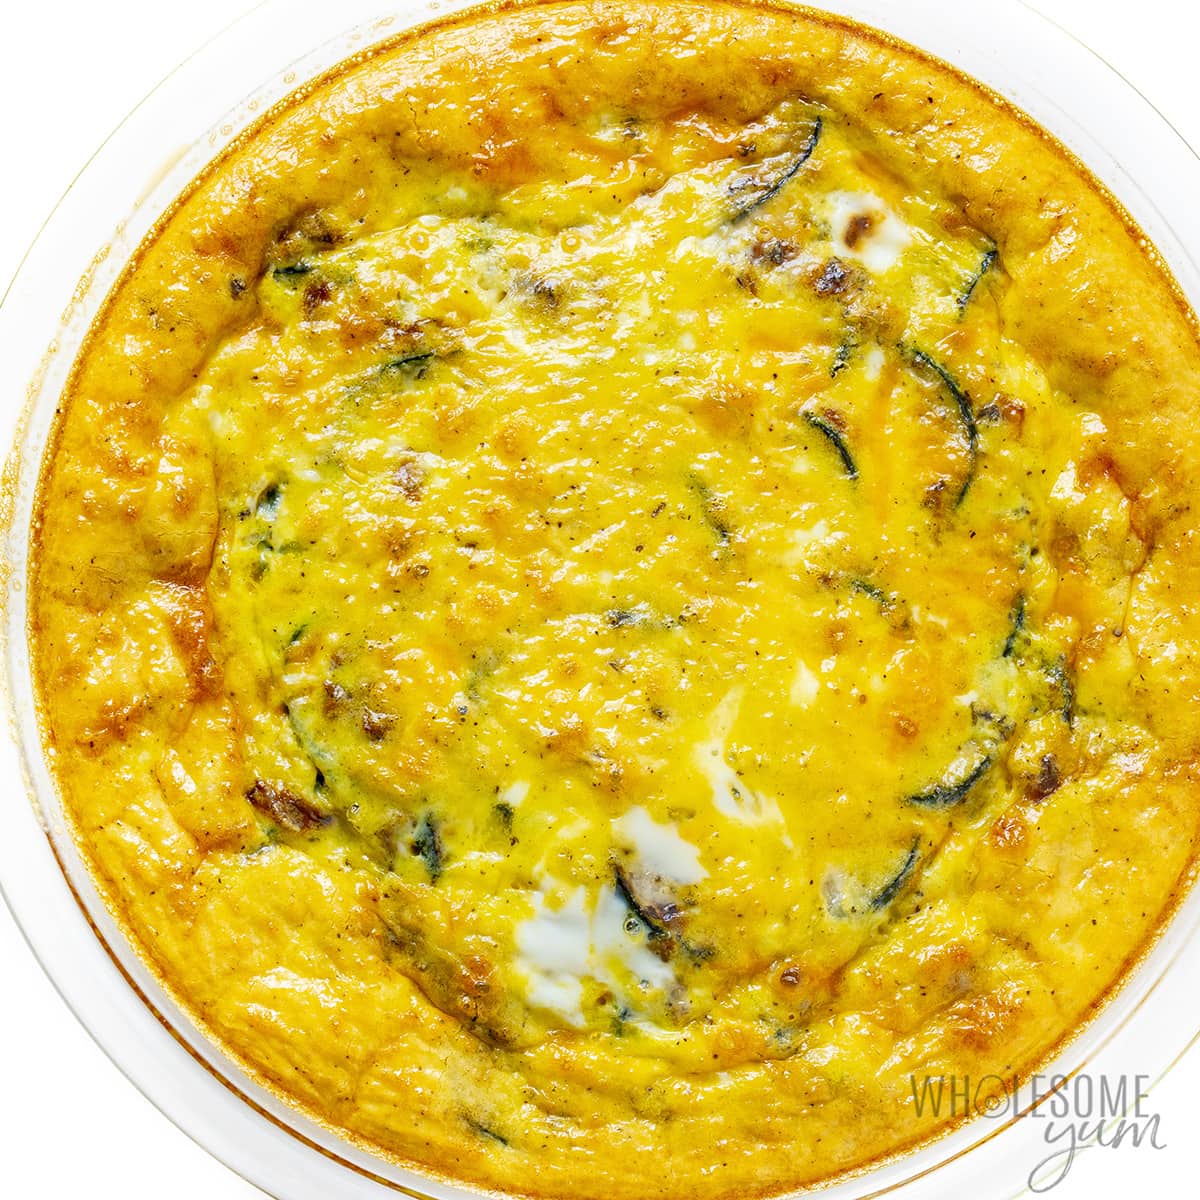 Fully baked zucchini quiche in pie plate.